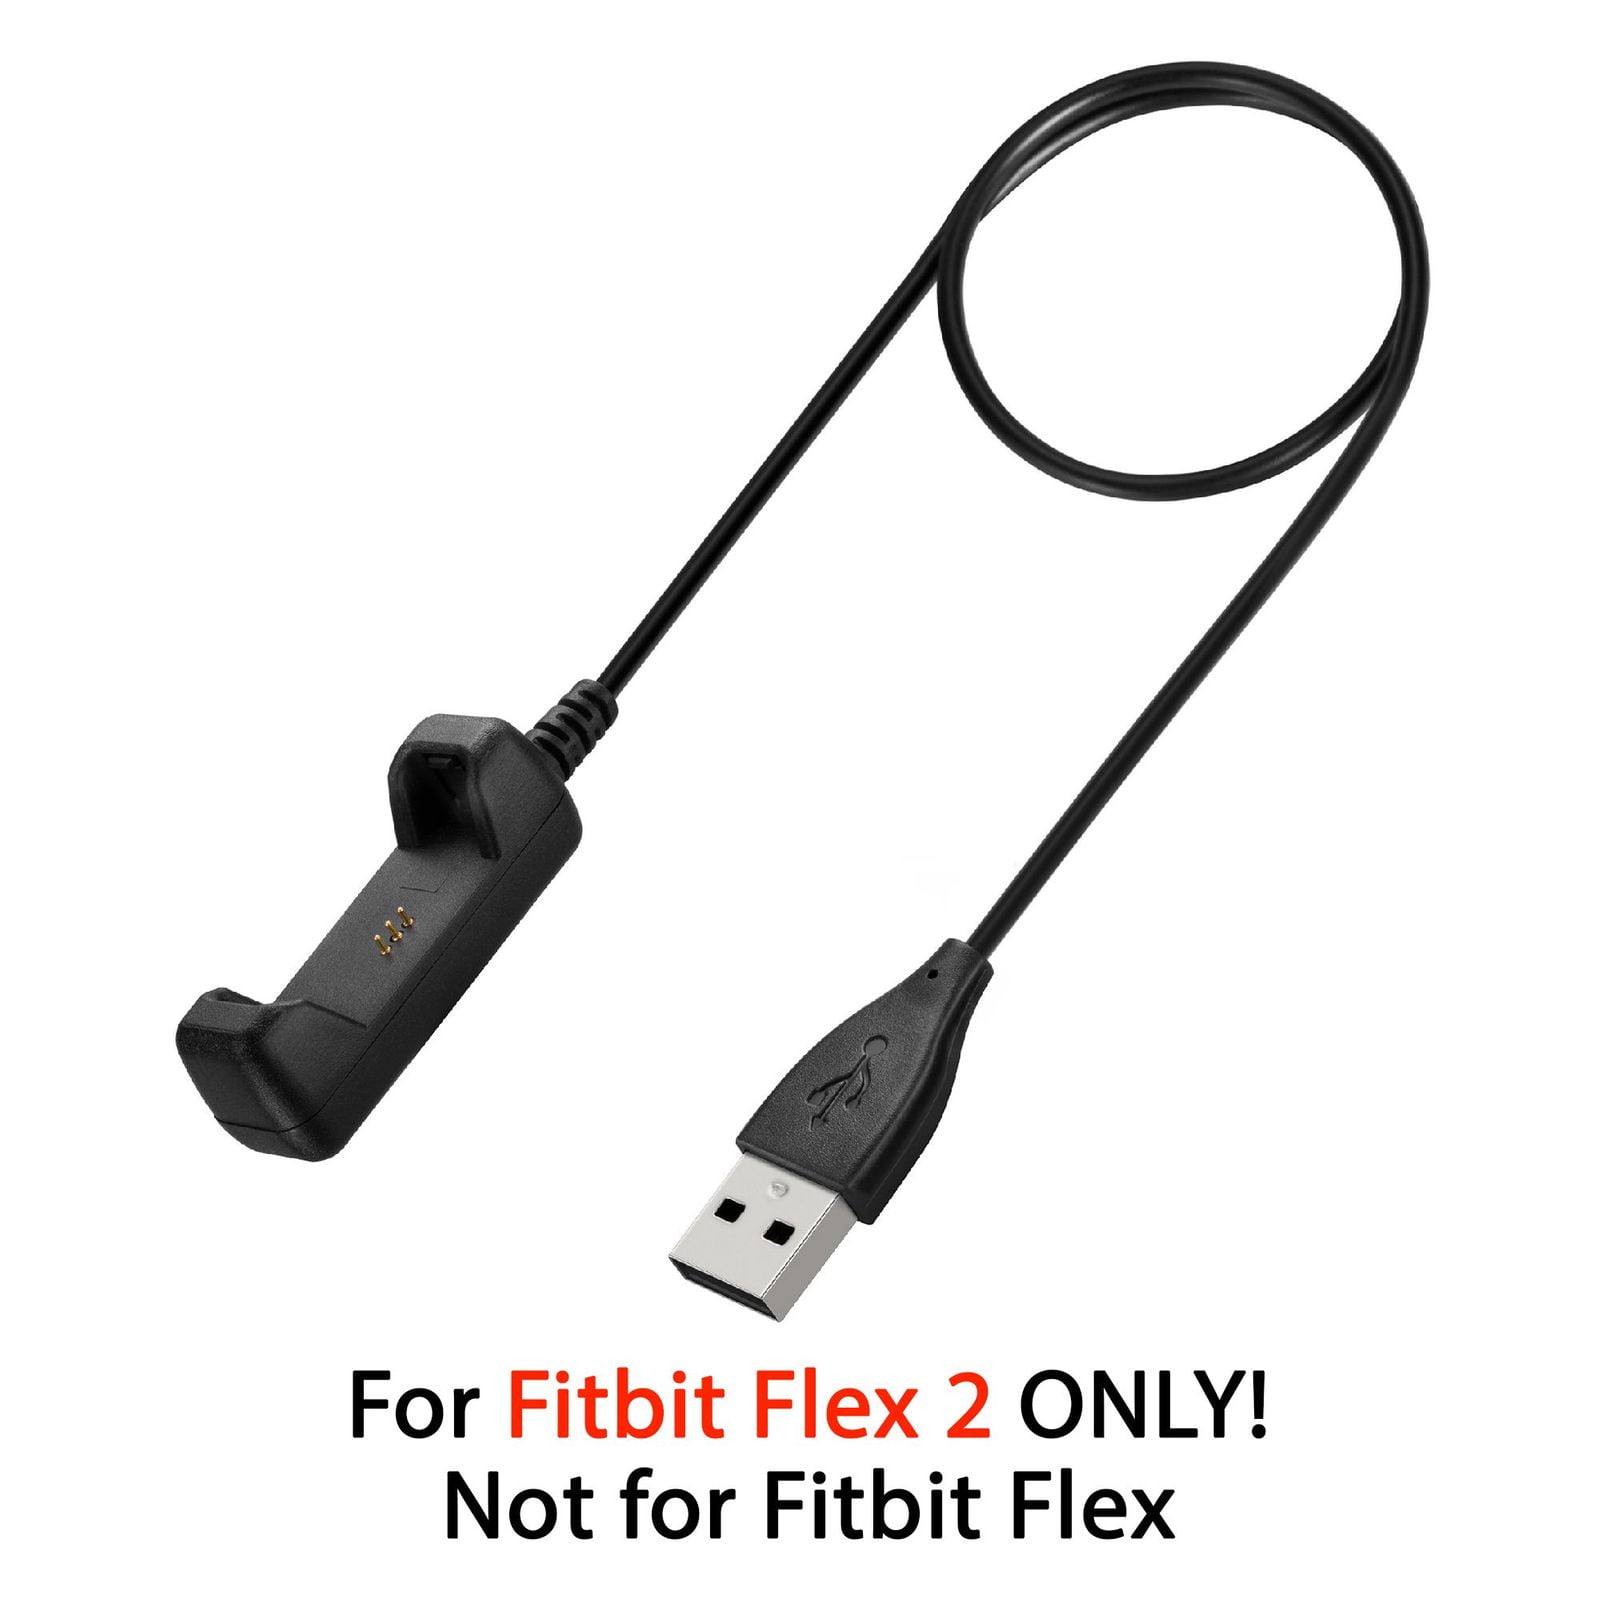 Charger For Fitbit Flex 2 Activity Wristband USB Charging Cable Cord WireYJUS 